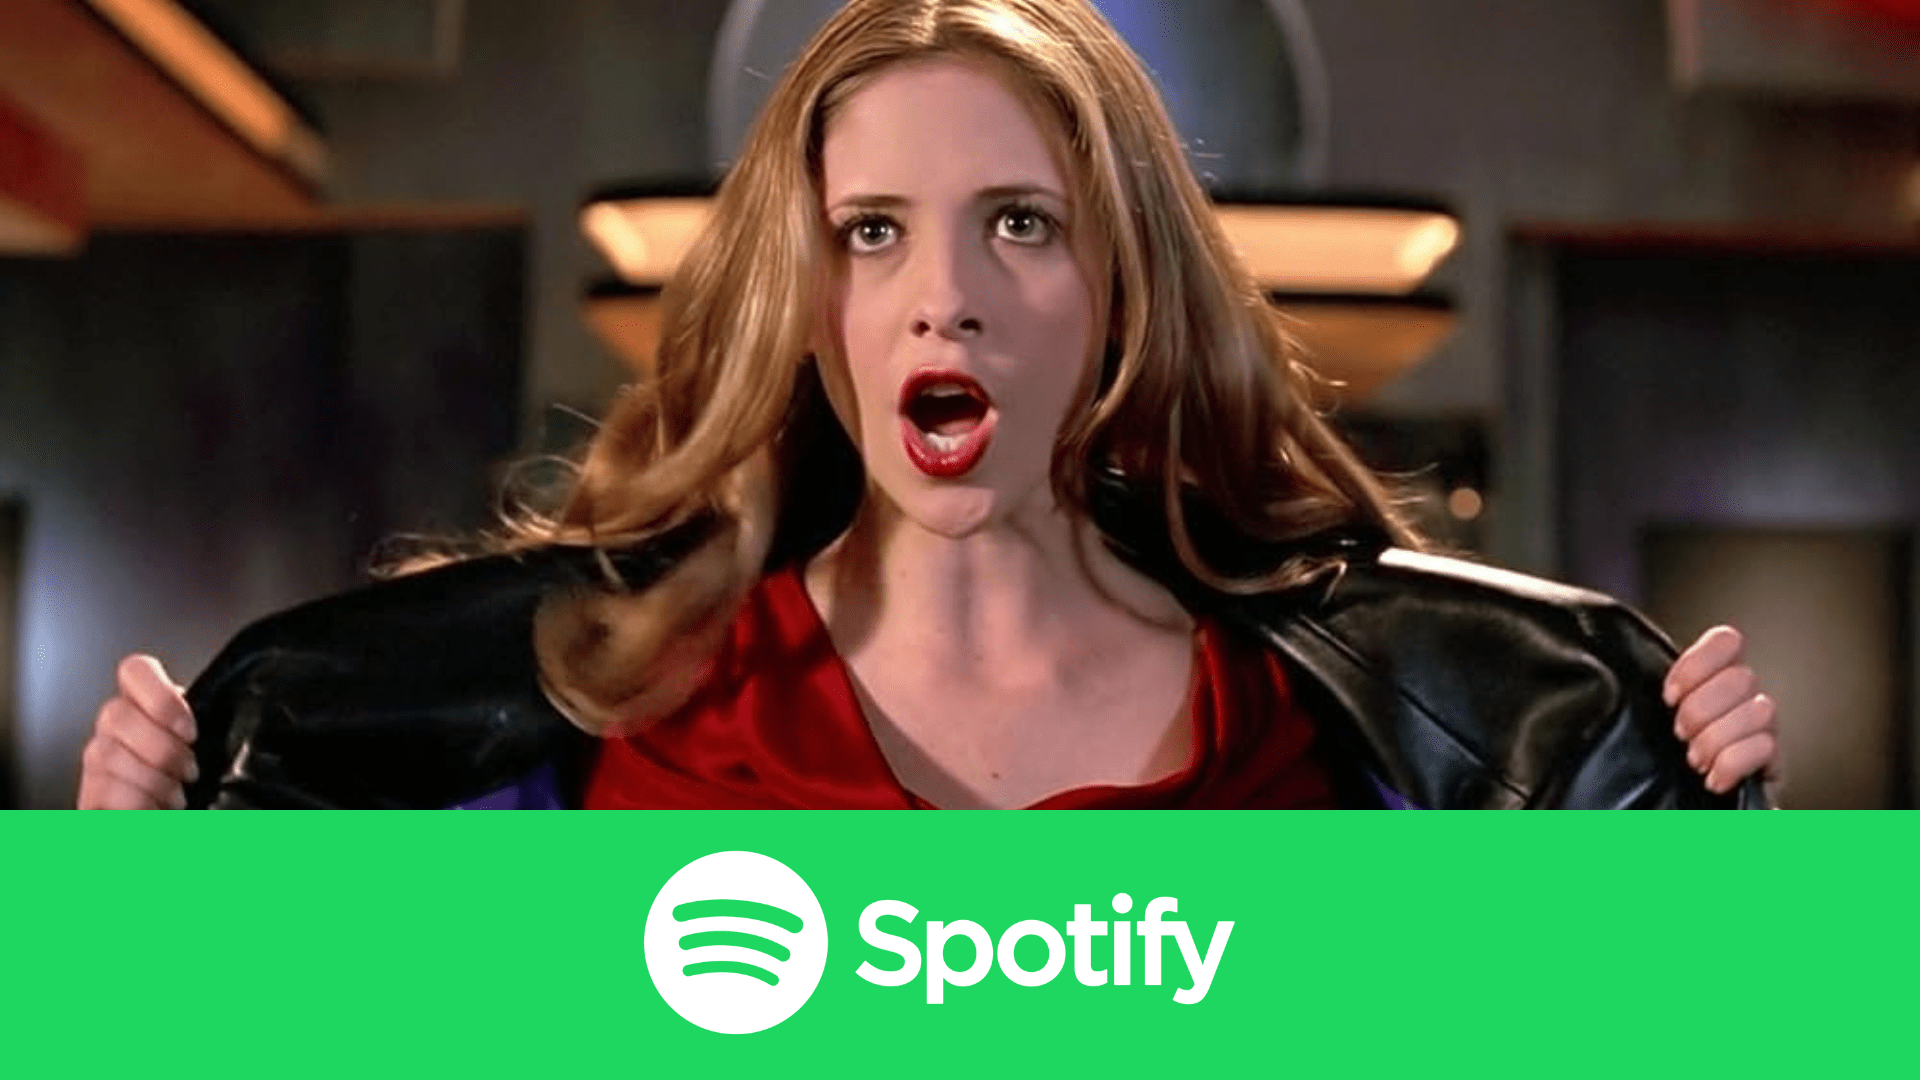 Buffy Spotify Playlist - Buffy Spotify Playlist: Listen To Every Song Featured In Buffy The Vampire Slayer